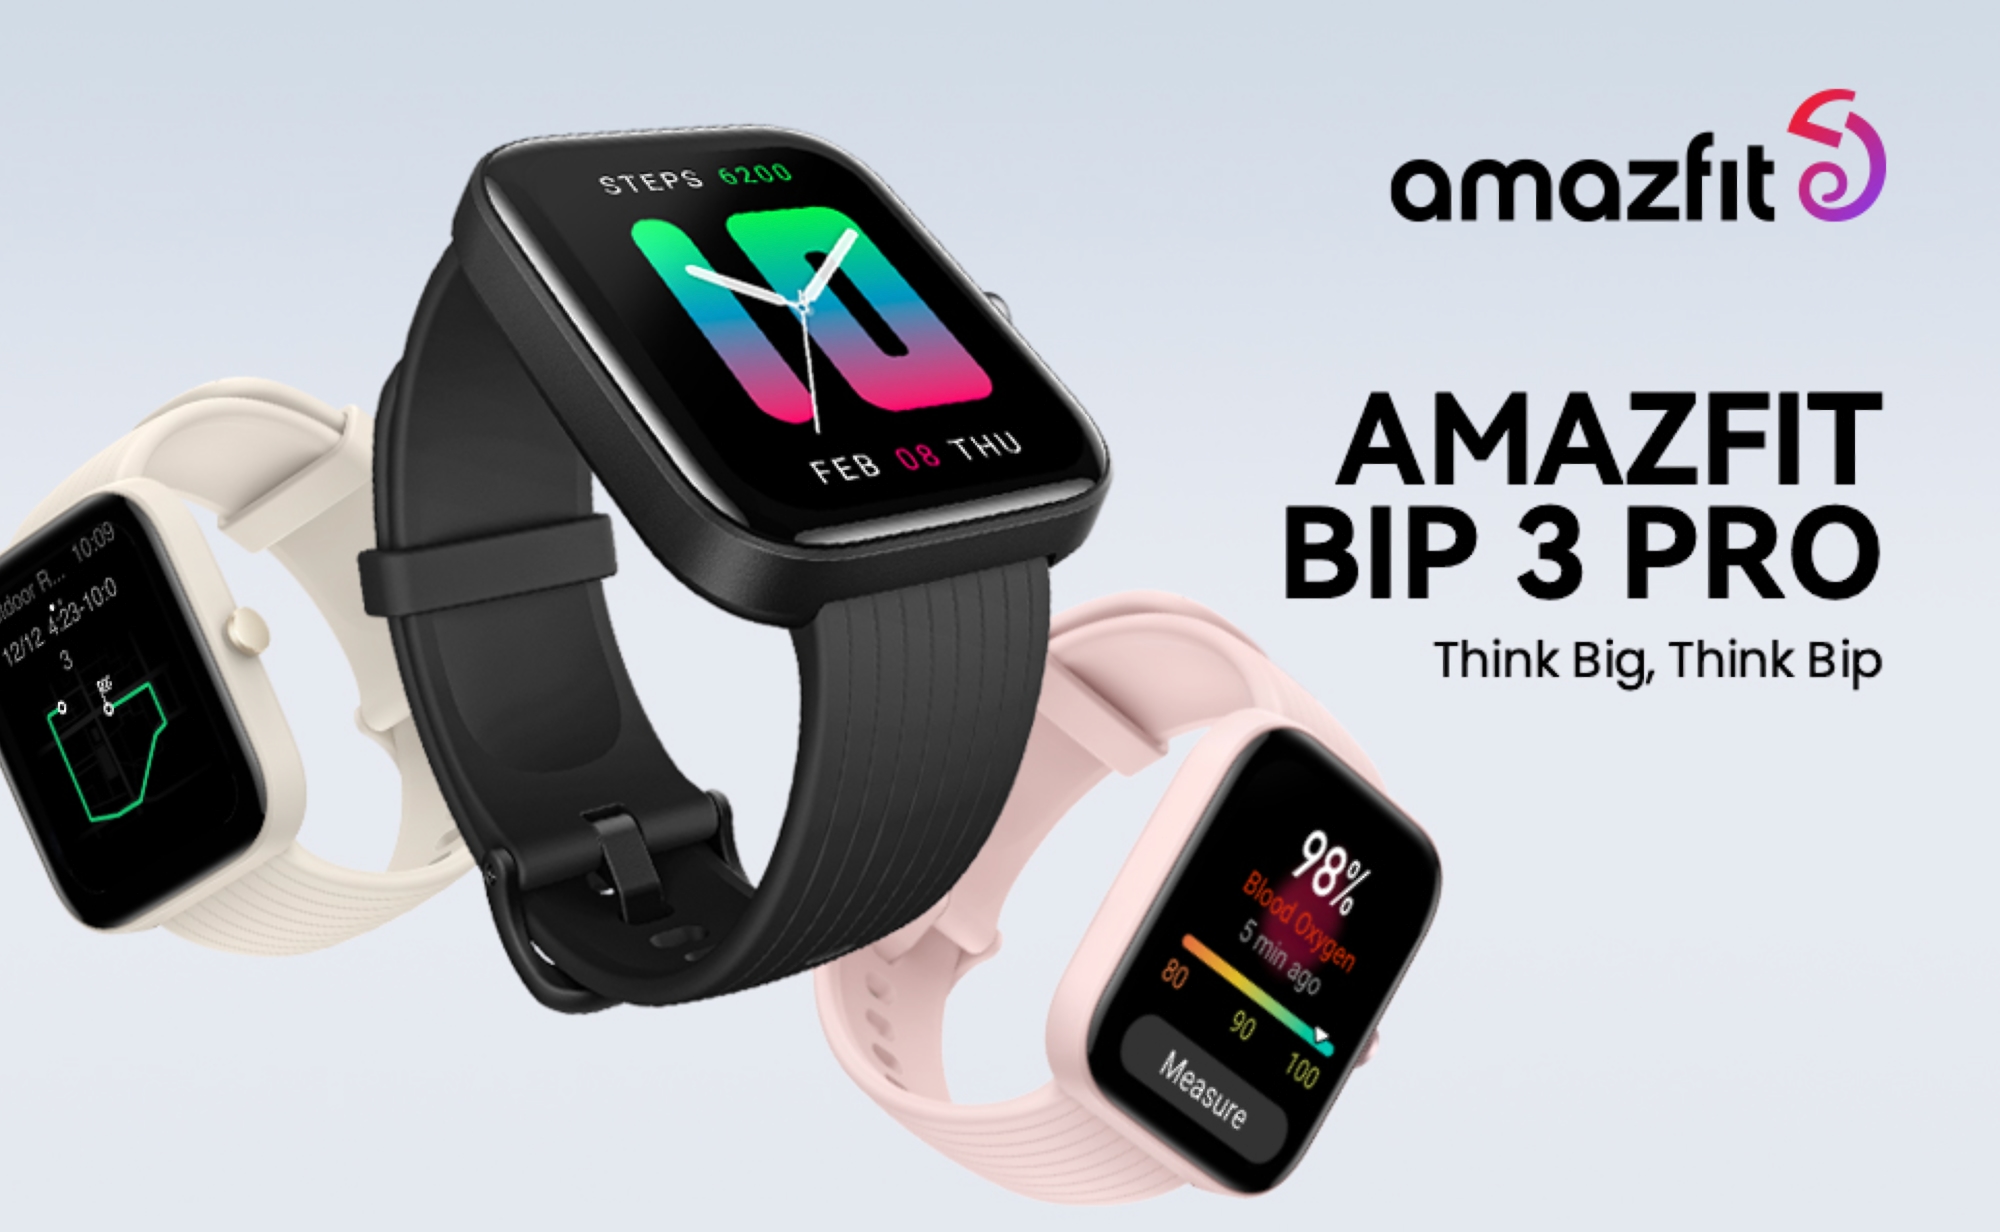 Amazfit Bip 3 Pro with four navigation systems, Alexa support, and up to 14 days of battery life is on sale on Amazon with a $15 discount